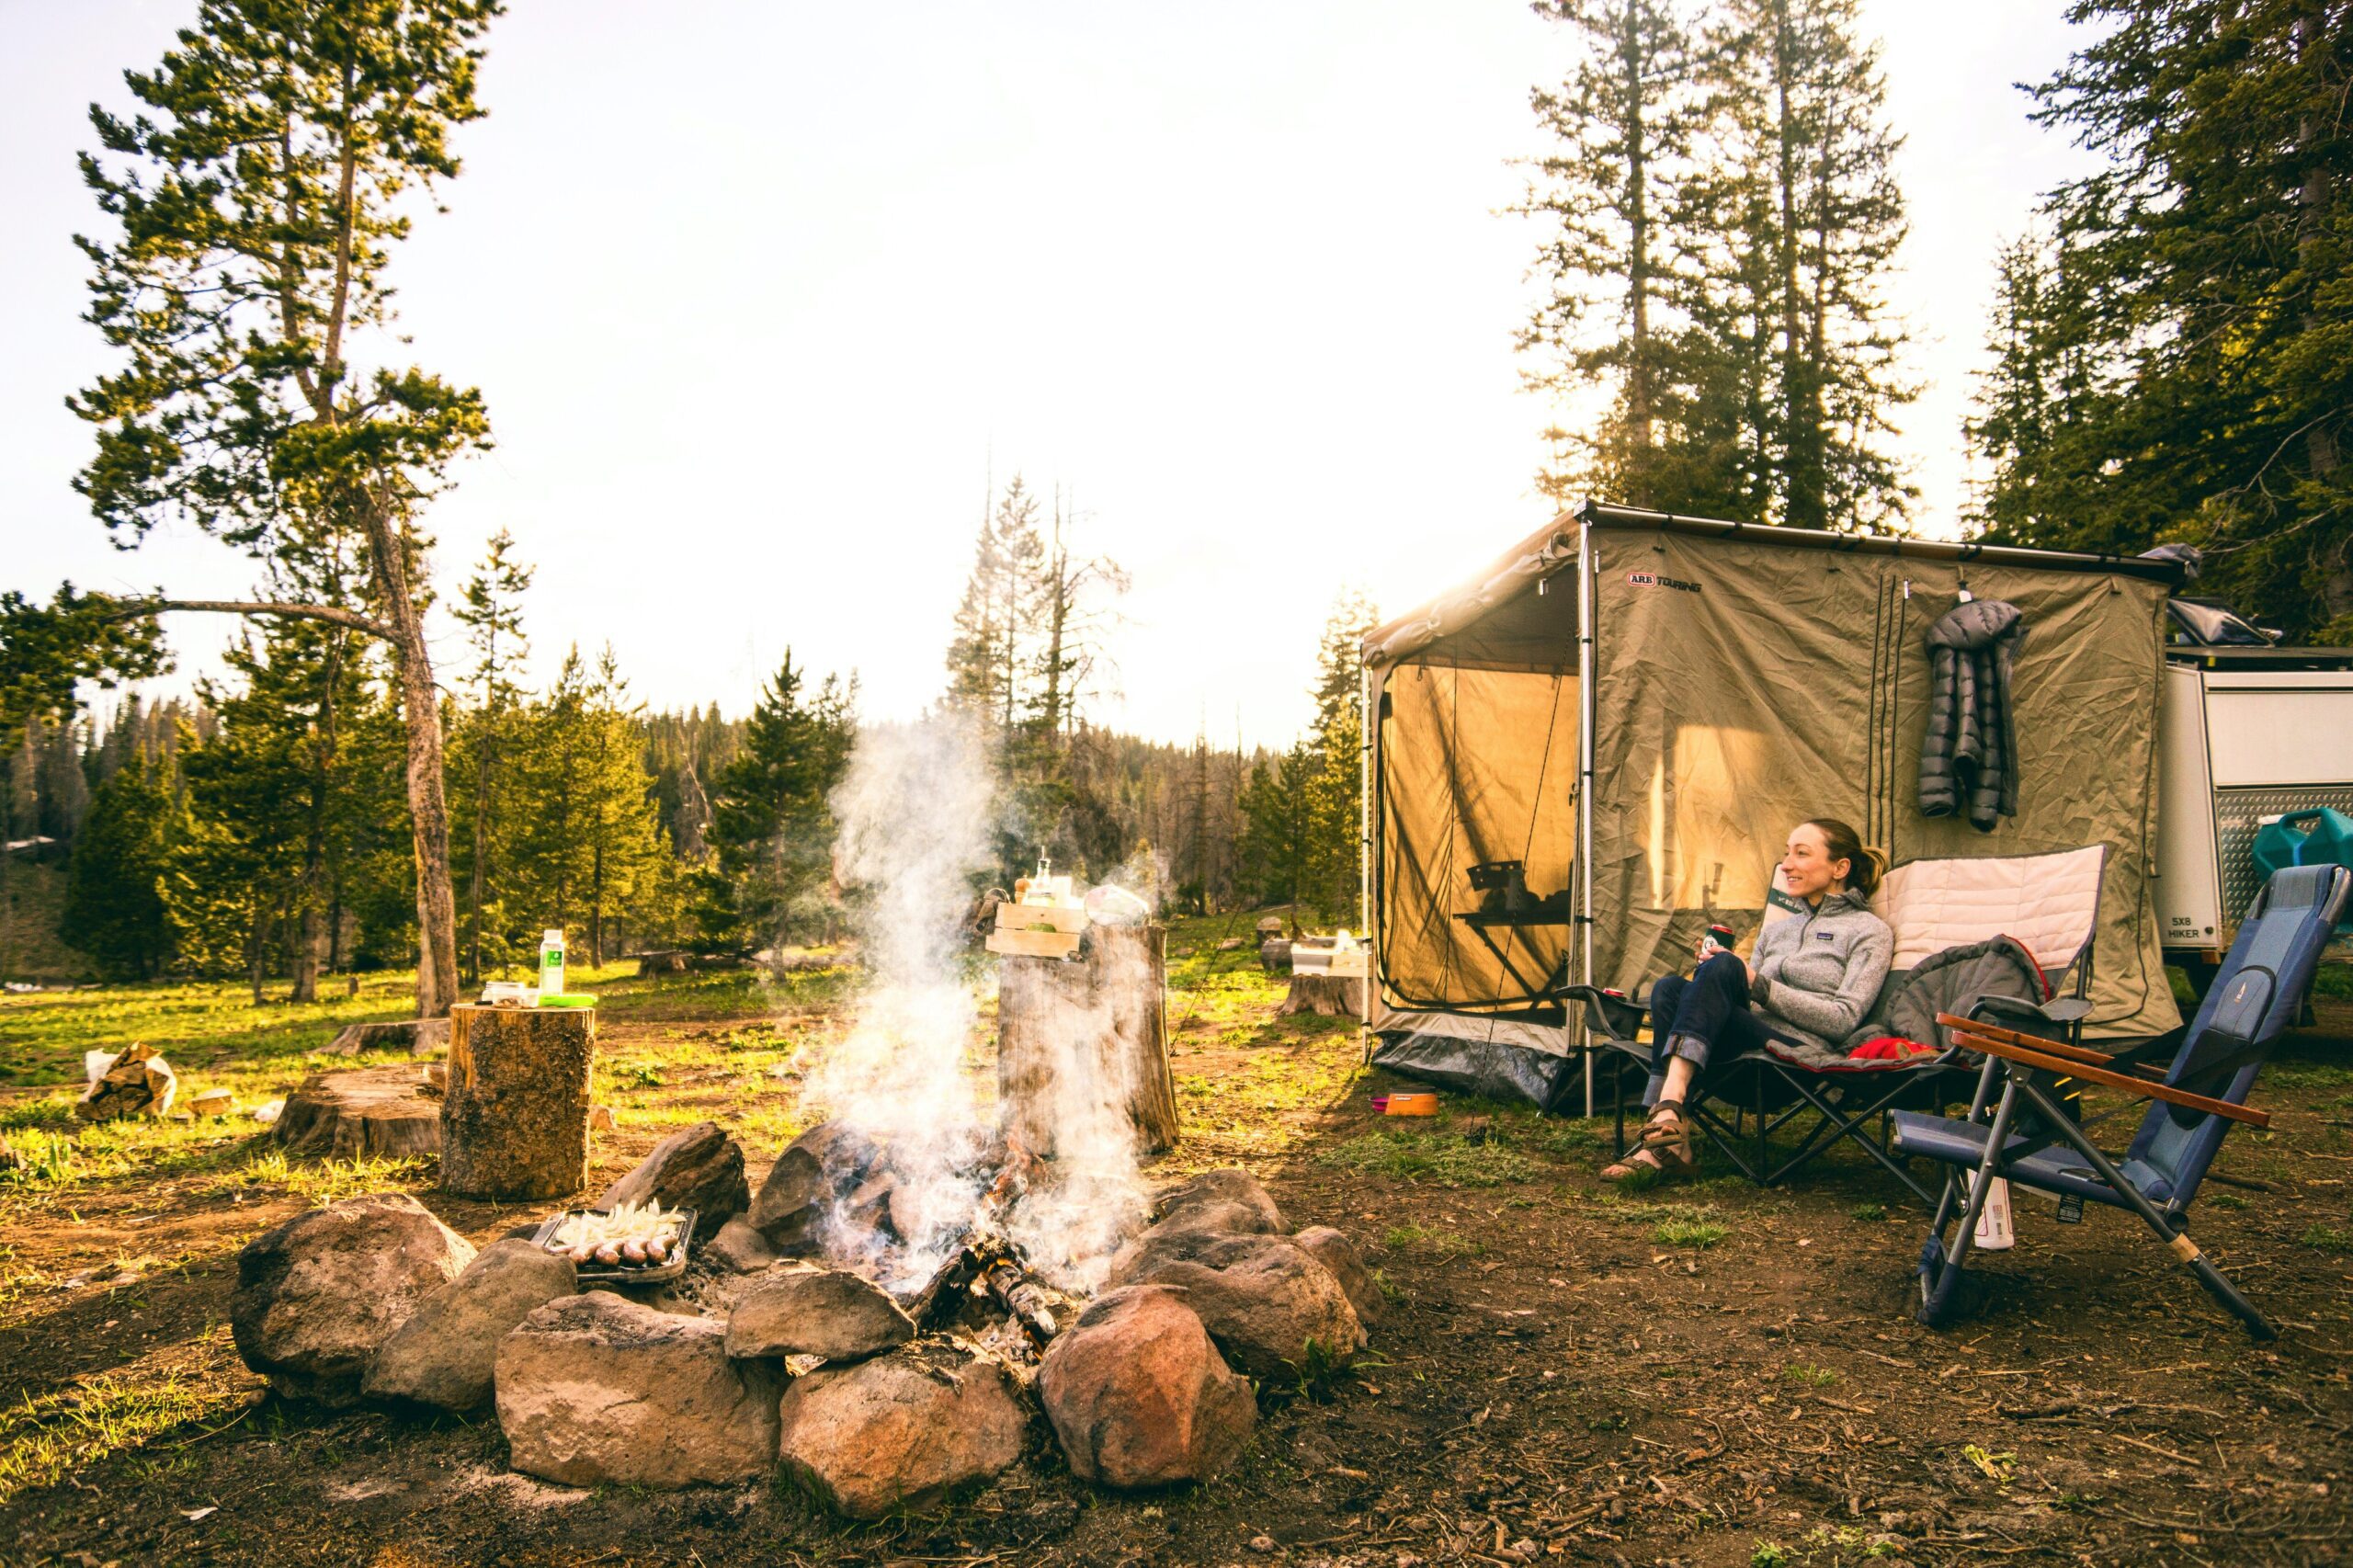 Camping Safety and Survival: Essential Tips for a Safe and Adventurous Outdoor Experience